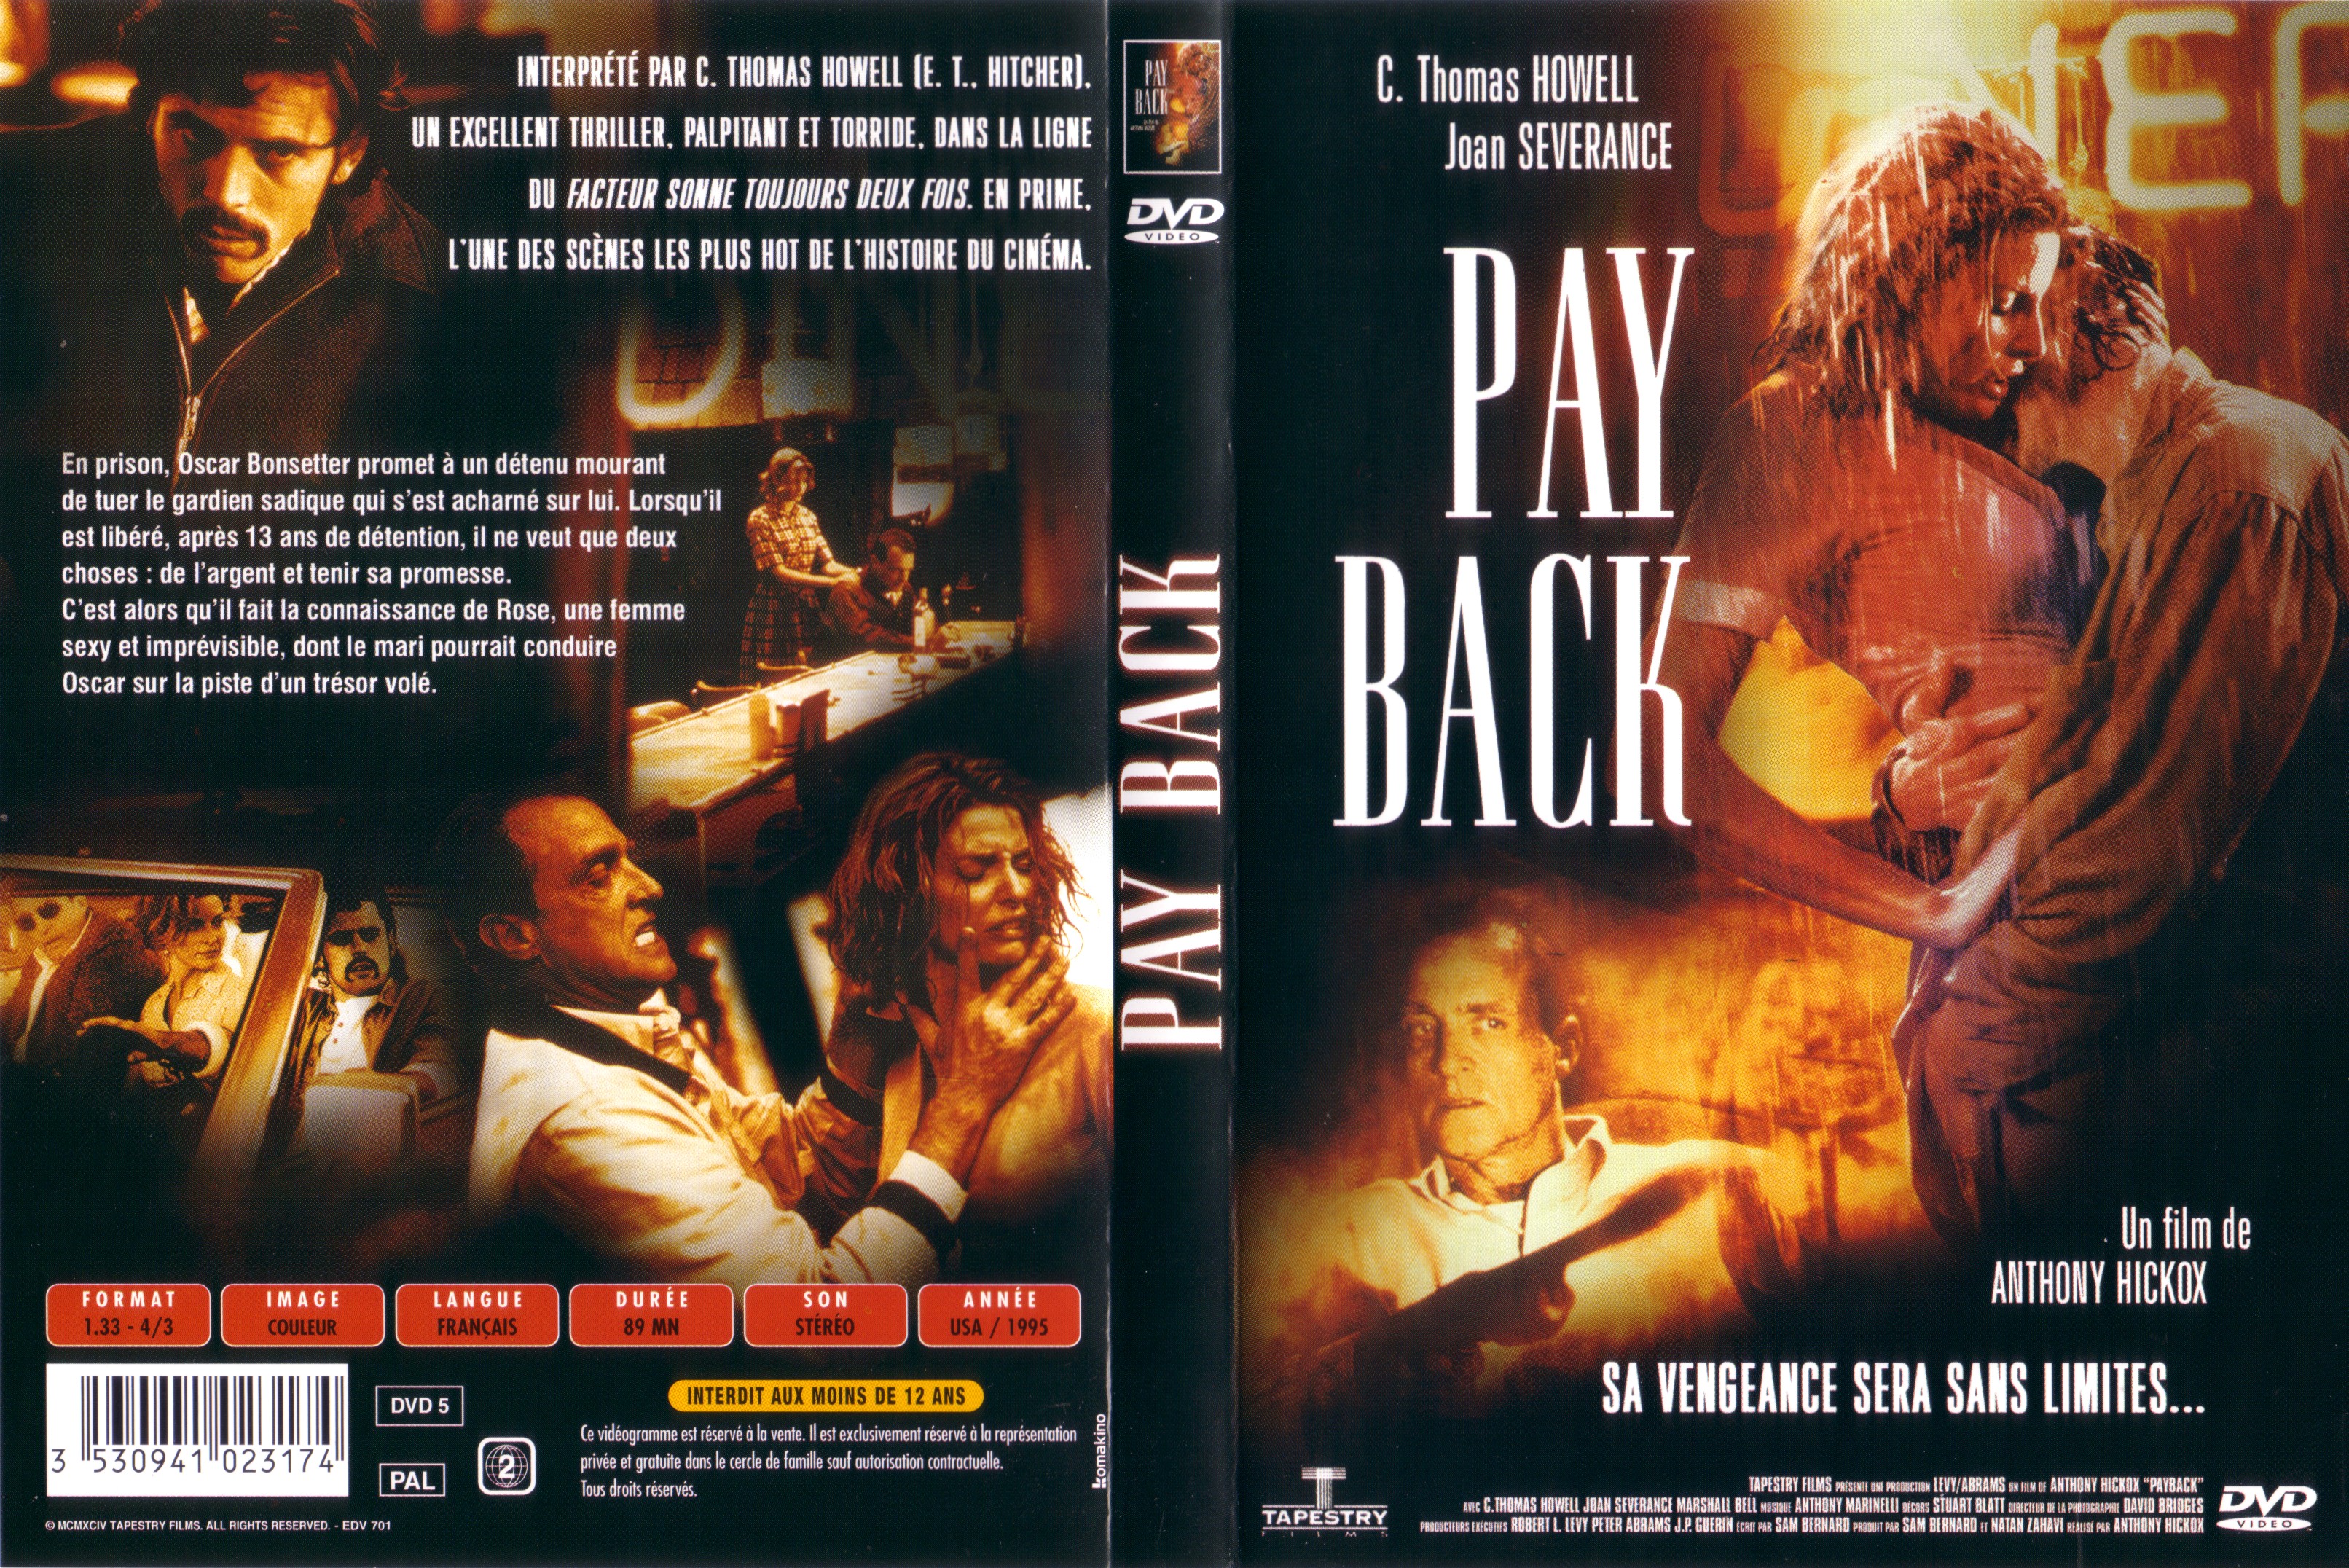 Jaquette DVD Pay back